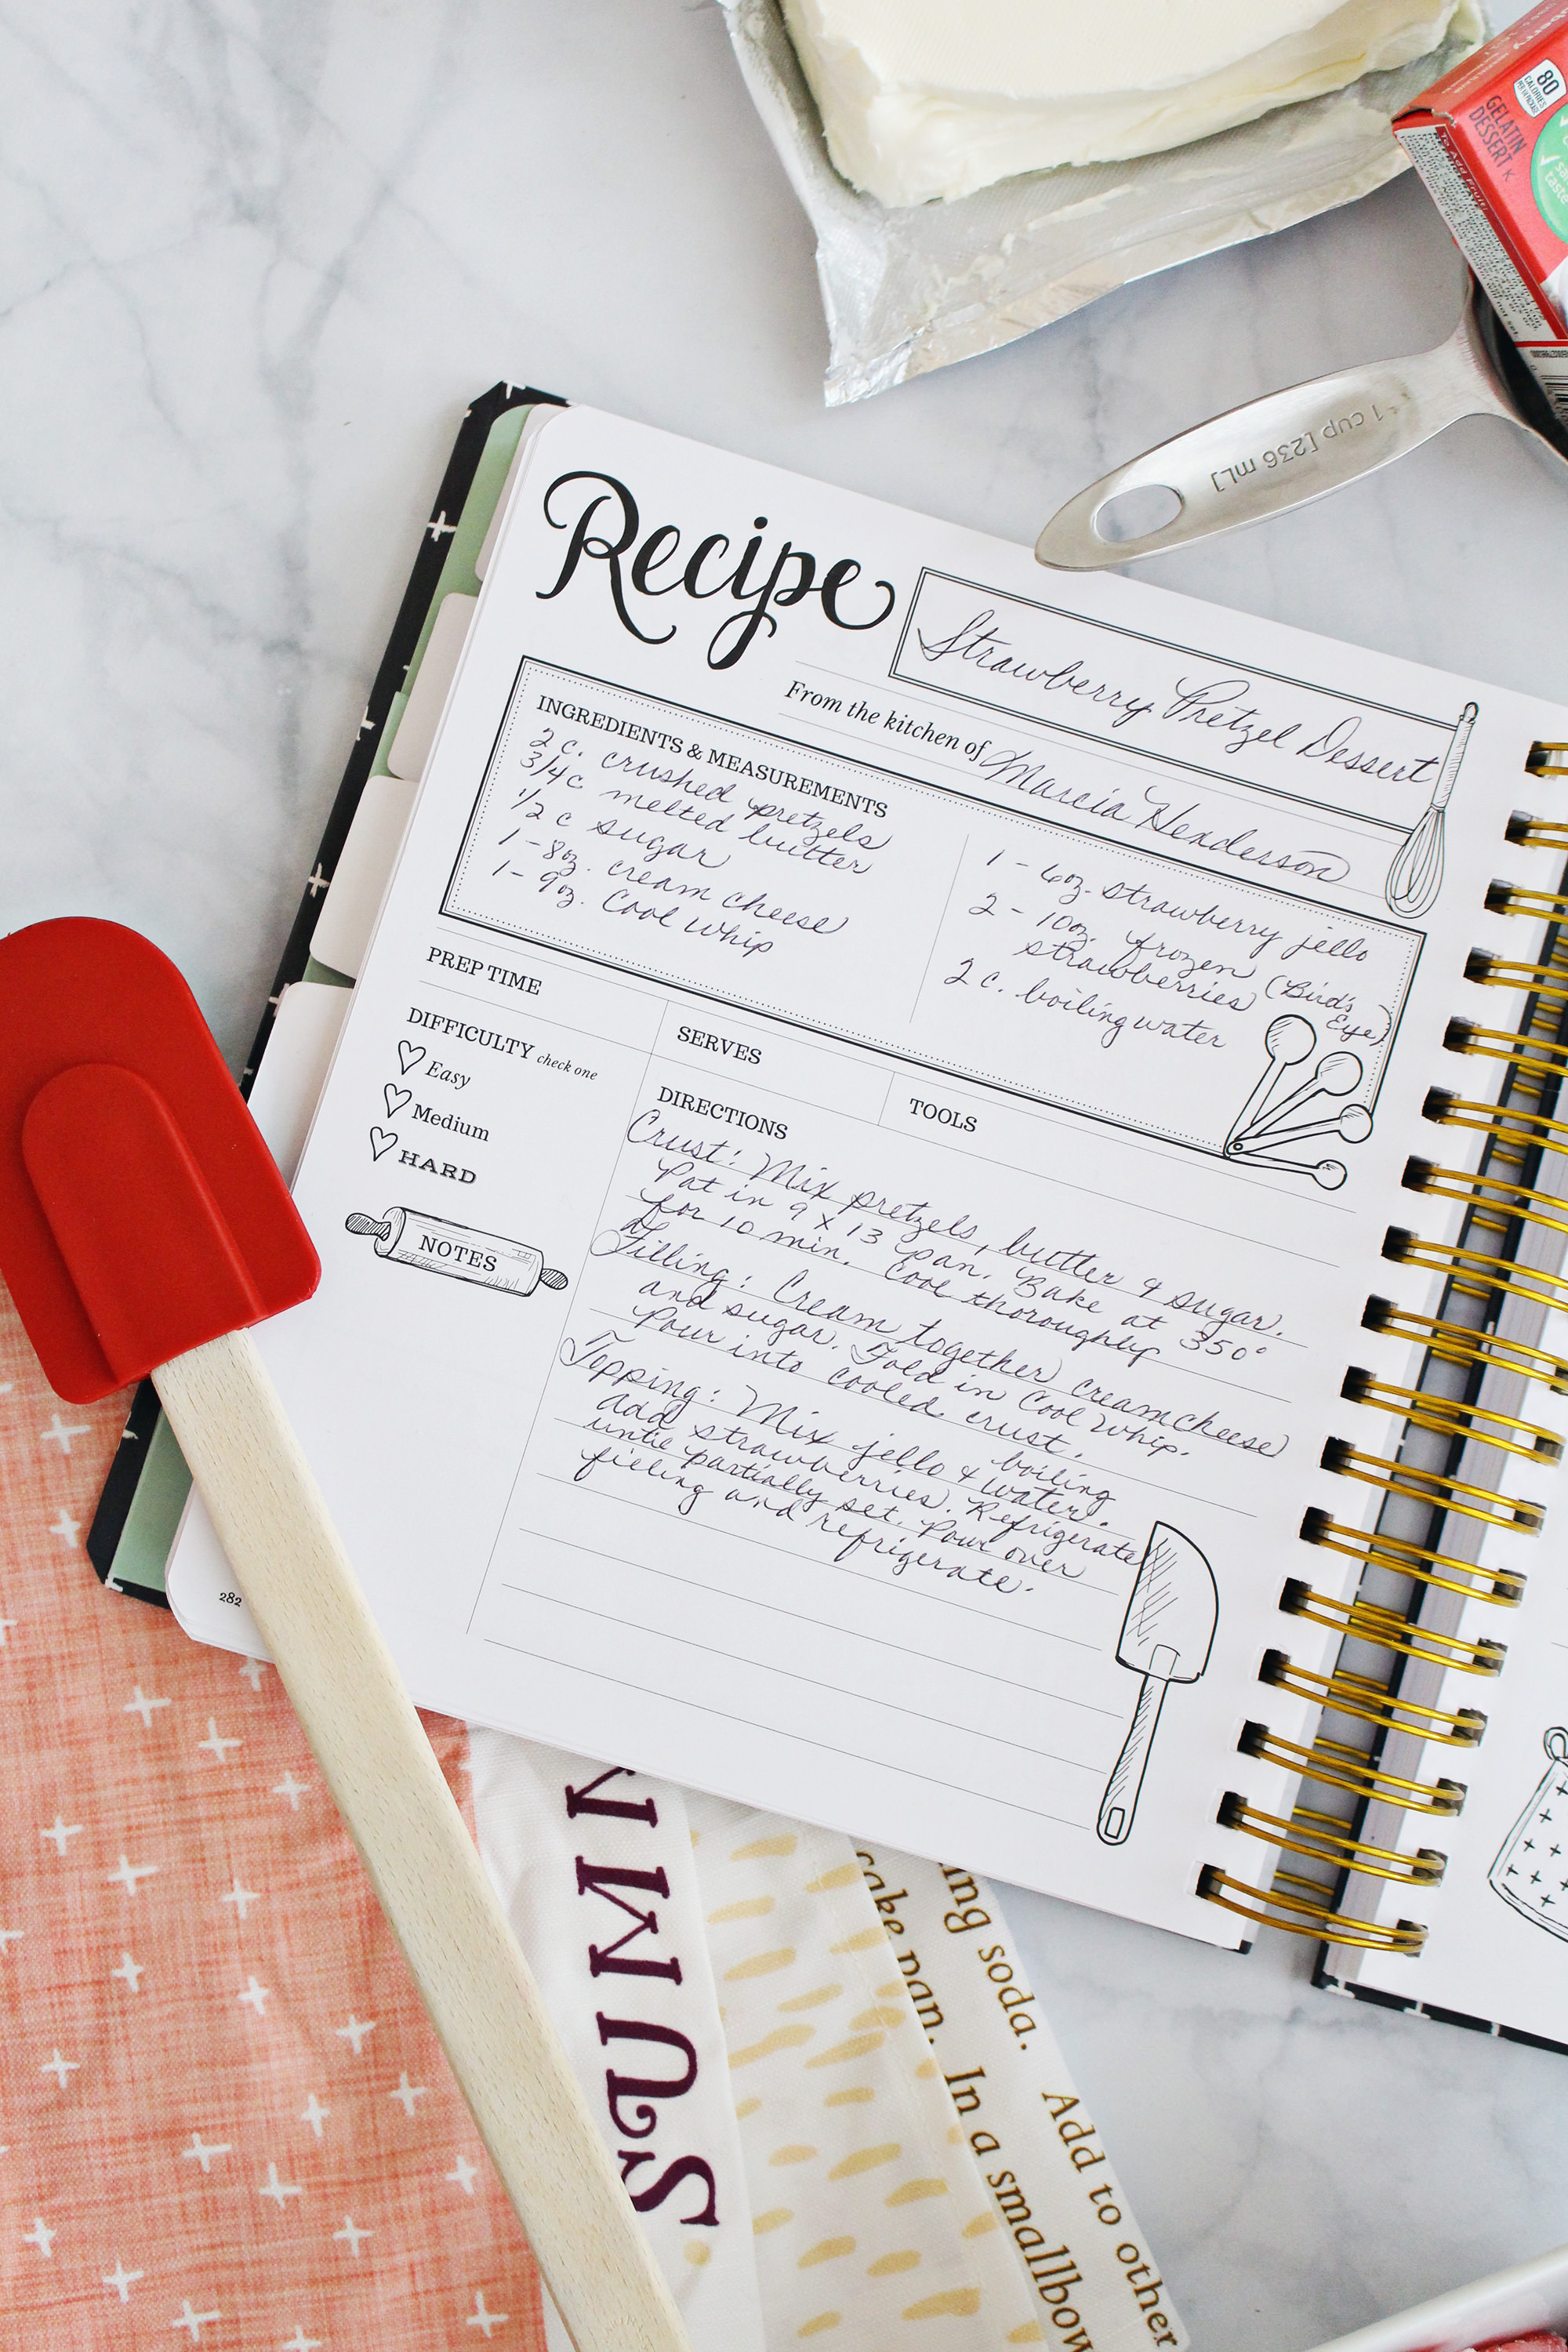 Have family members fill in the pages of your Keepsake Kitchen Diary with their own handwriting. It will be a special, family heirloom.